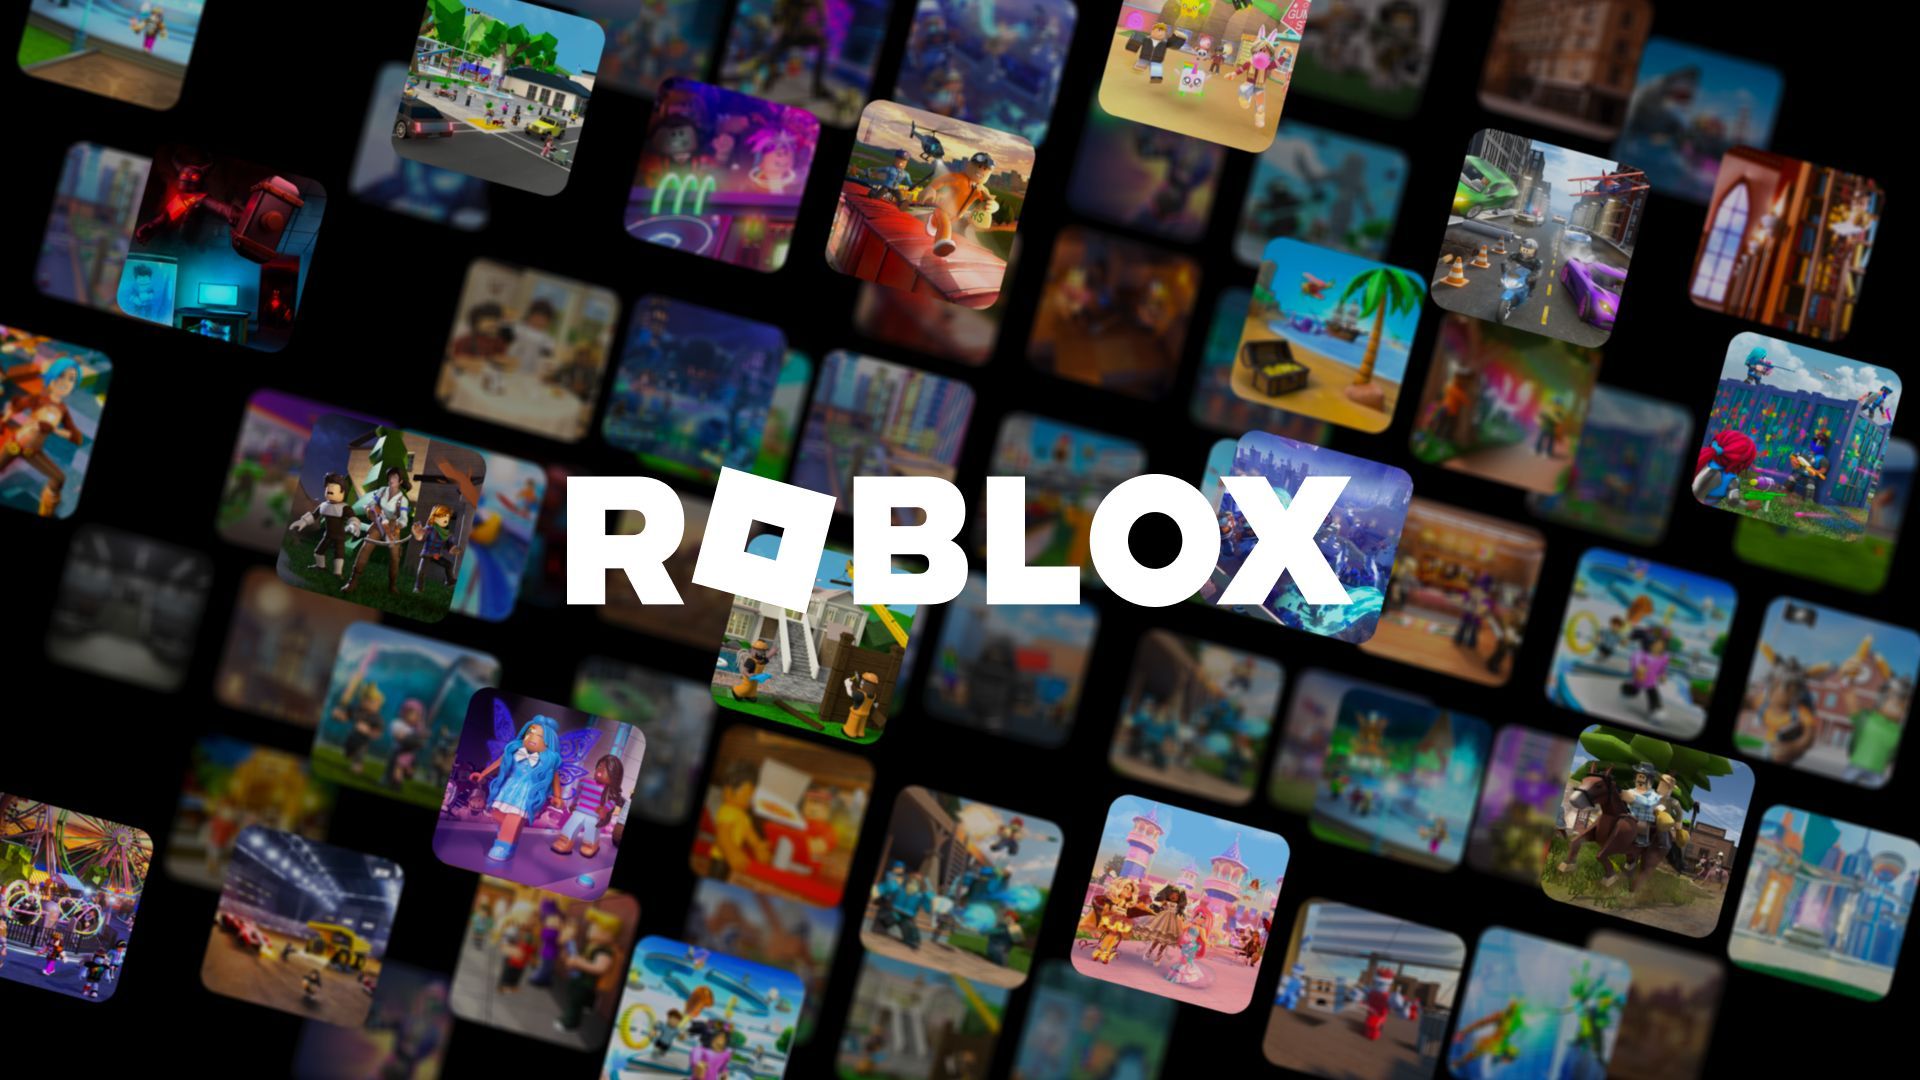 How to get voice chat on Roblox without ID